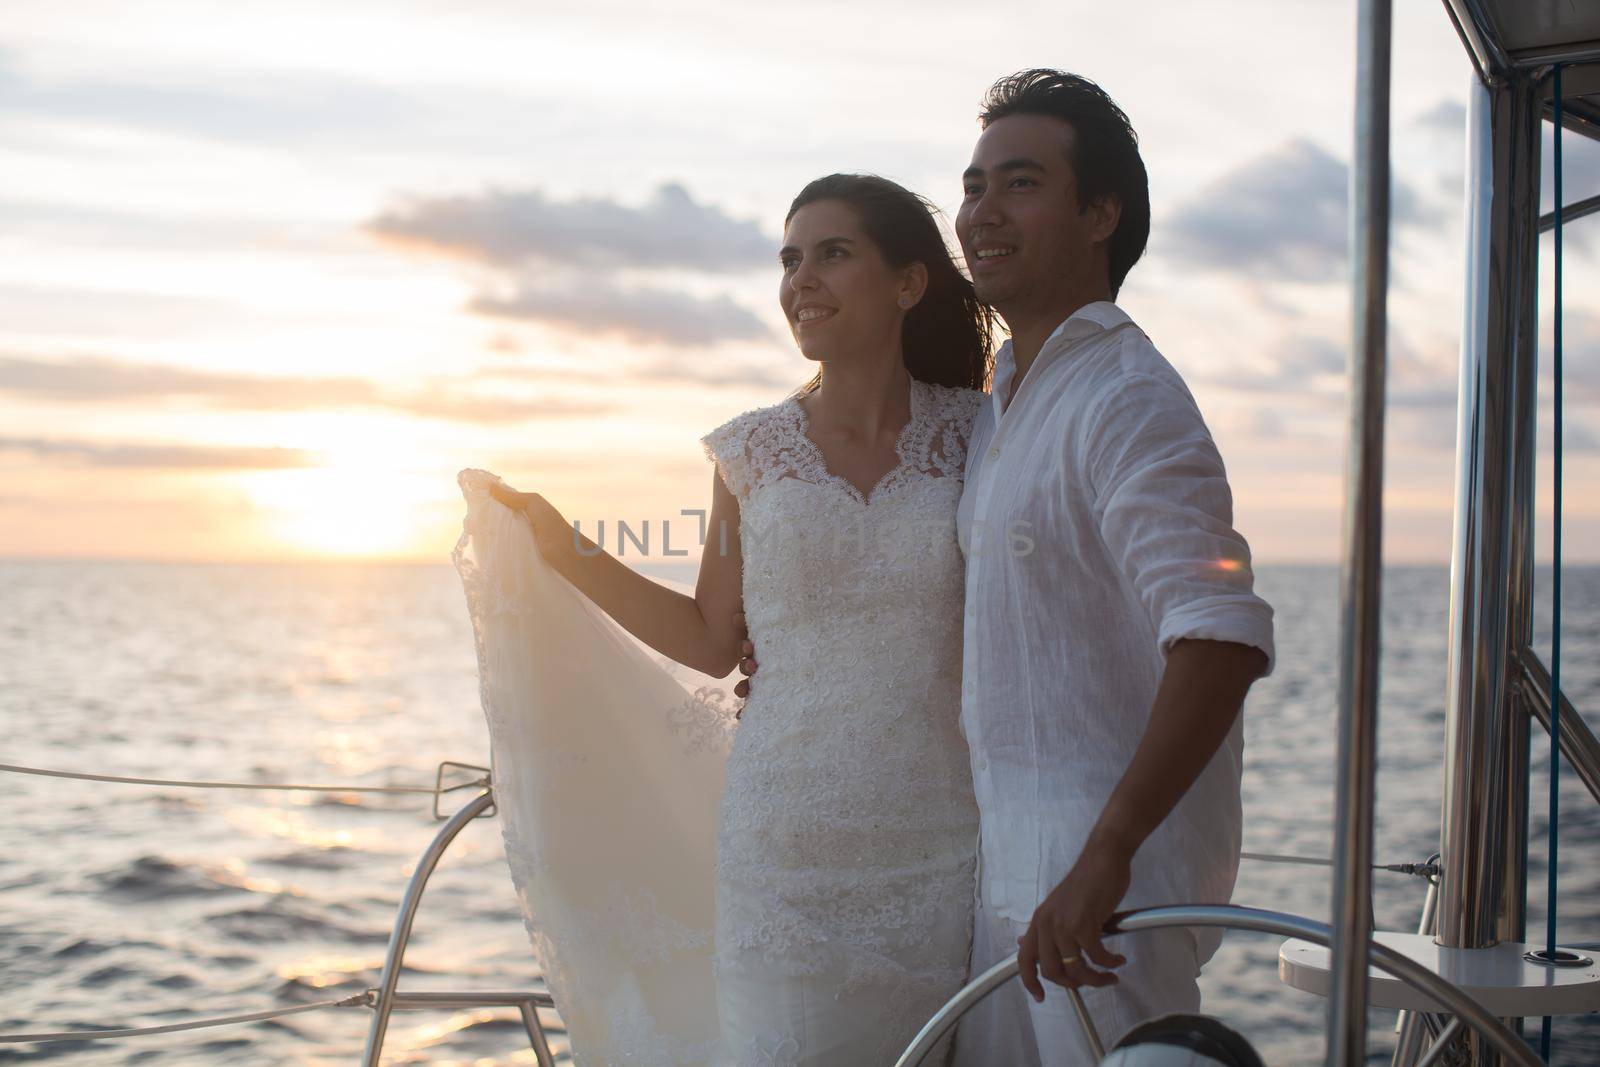 The bride and groom on a catamaran. The sunset in the open Indian ocean.